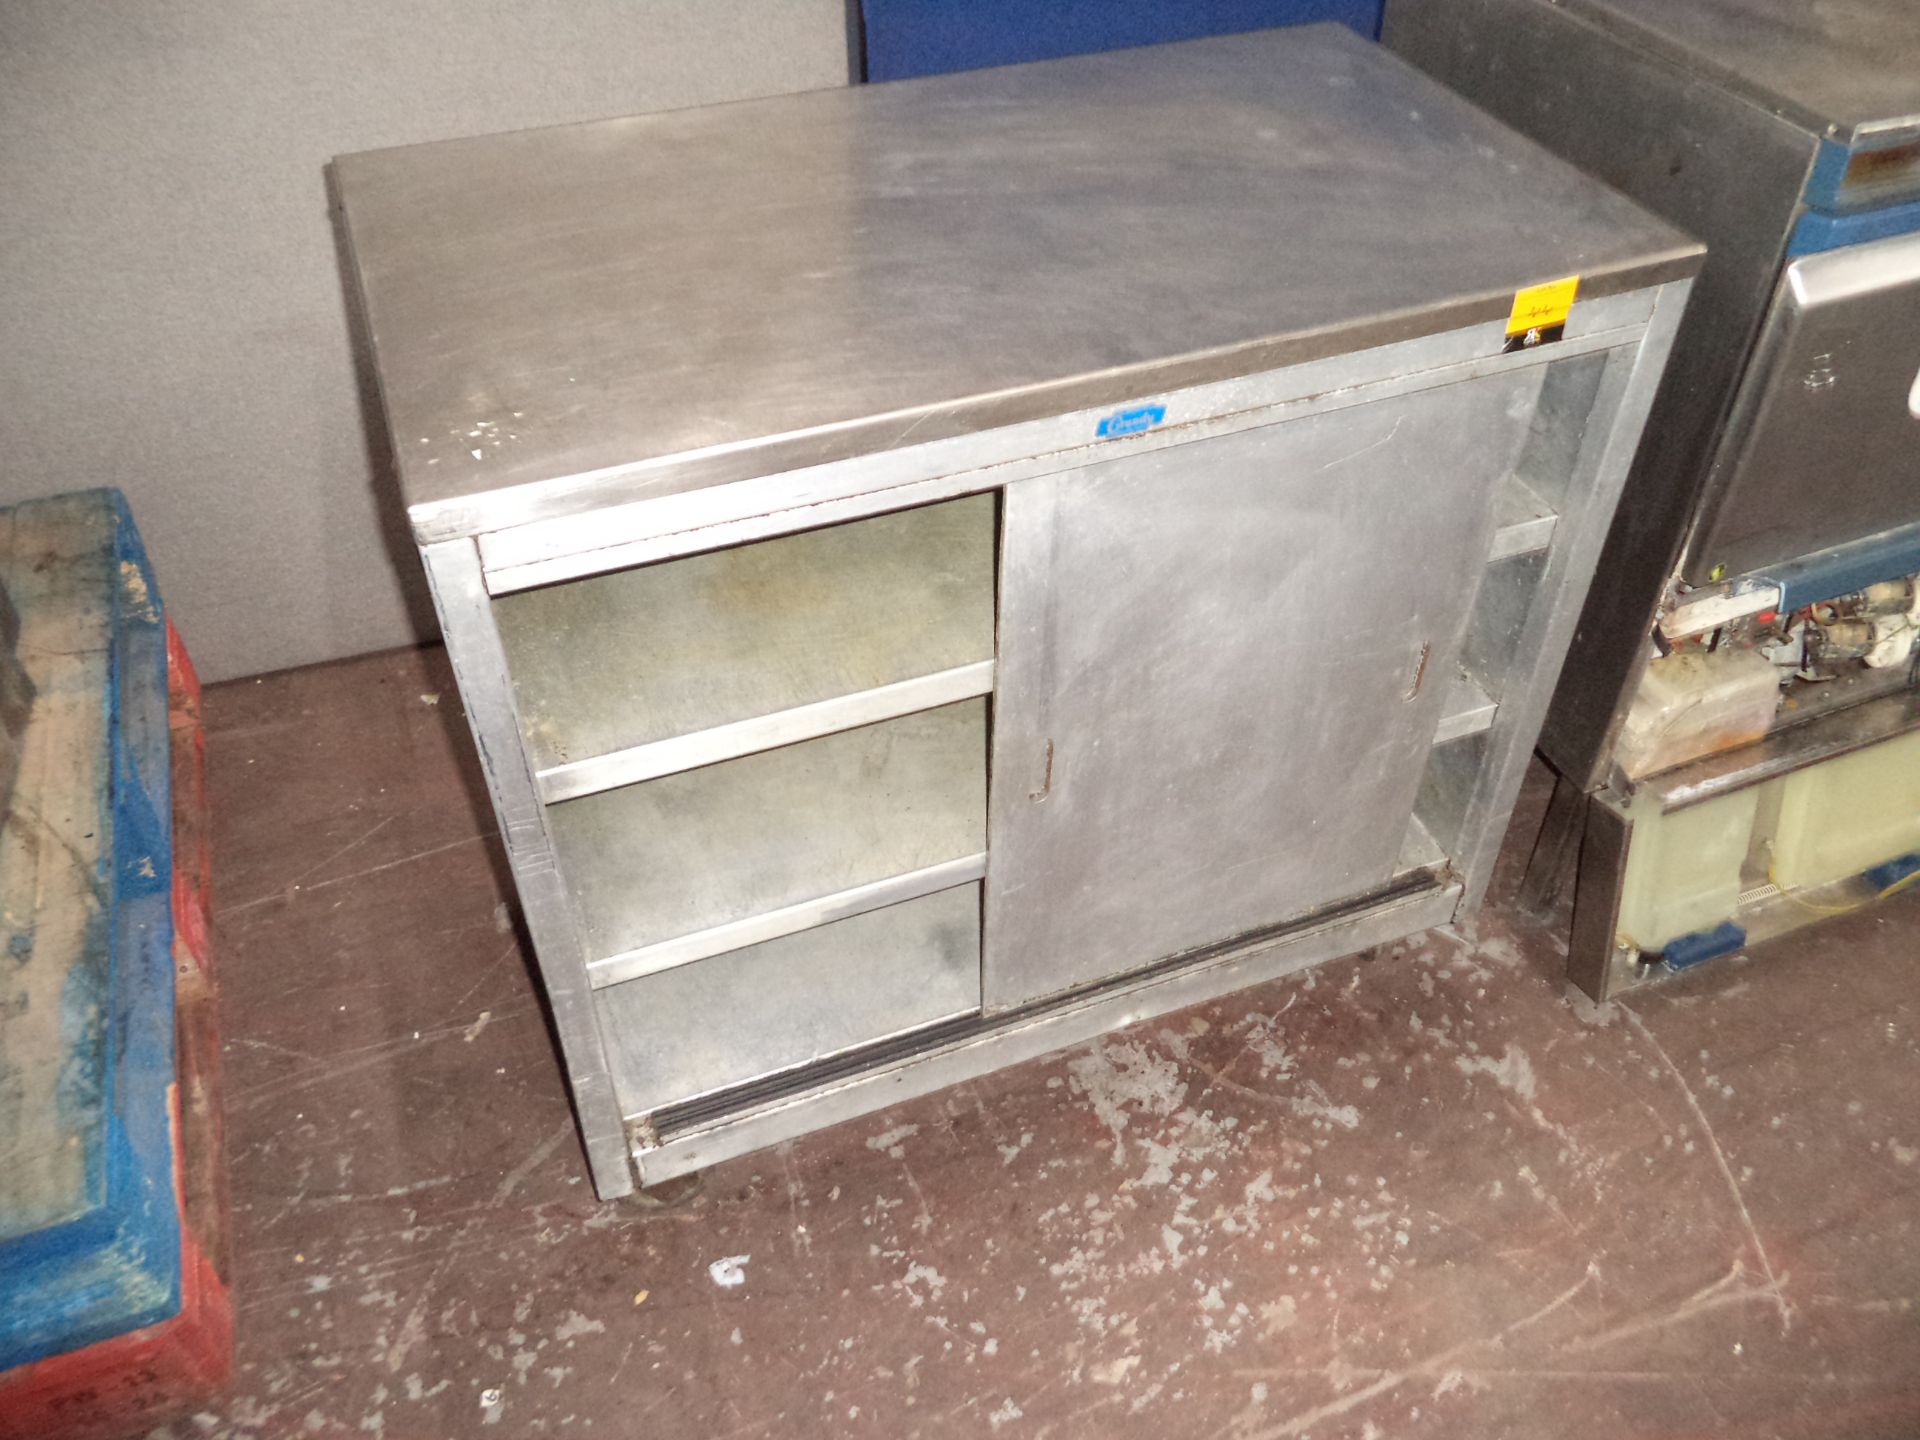 Grundy stainless steel warming cupboard IMPORTANT: Please remember goods successfully bid upon - Image 3 of 3